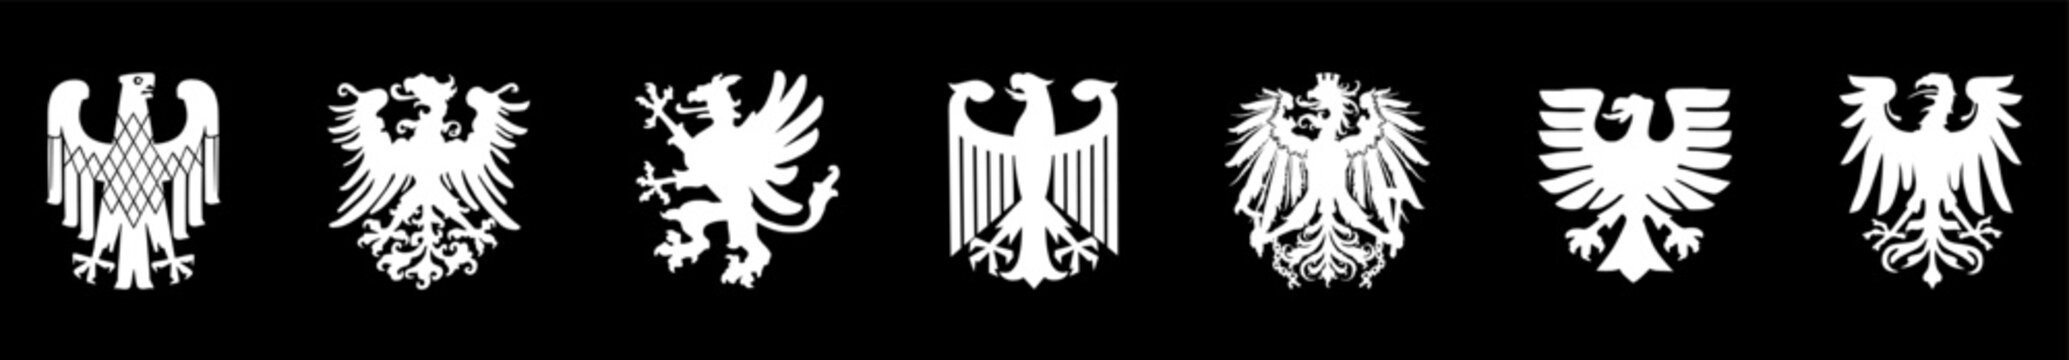 coat of arms of germany black wild eagle vector silhouette illustration bundesadler isolated. herald